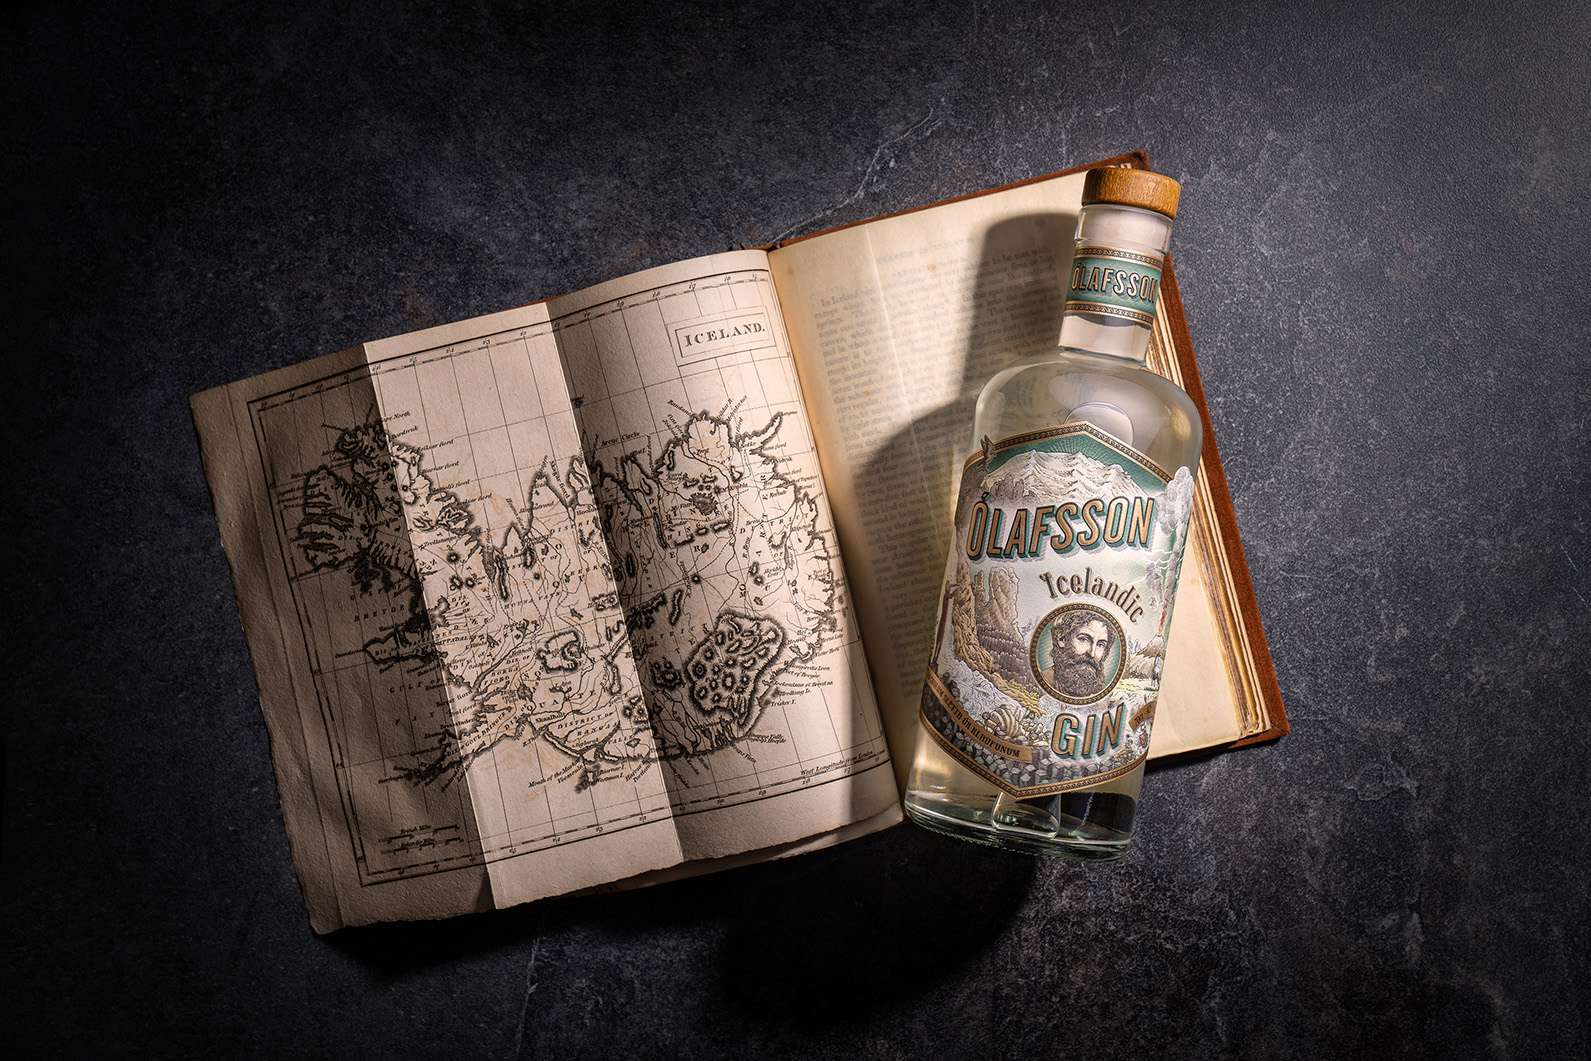 Olafsson Icelandic Gin Packaging Design by The Rooster Factory